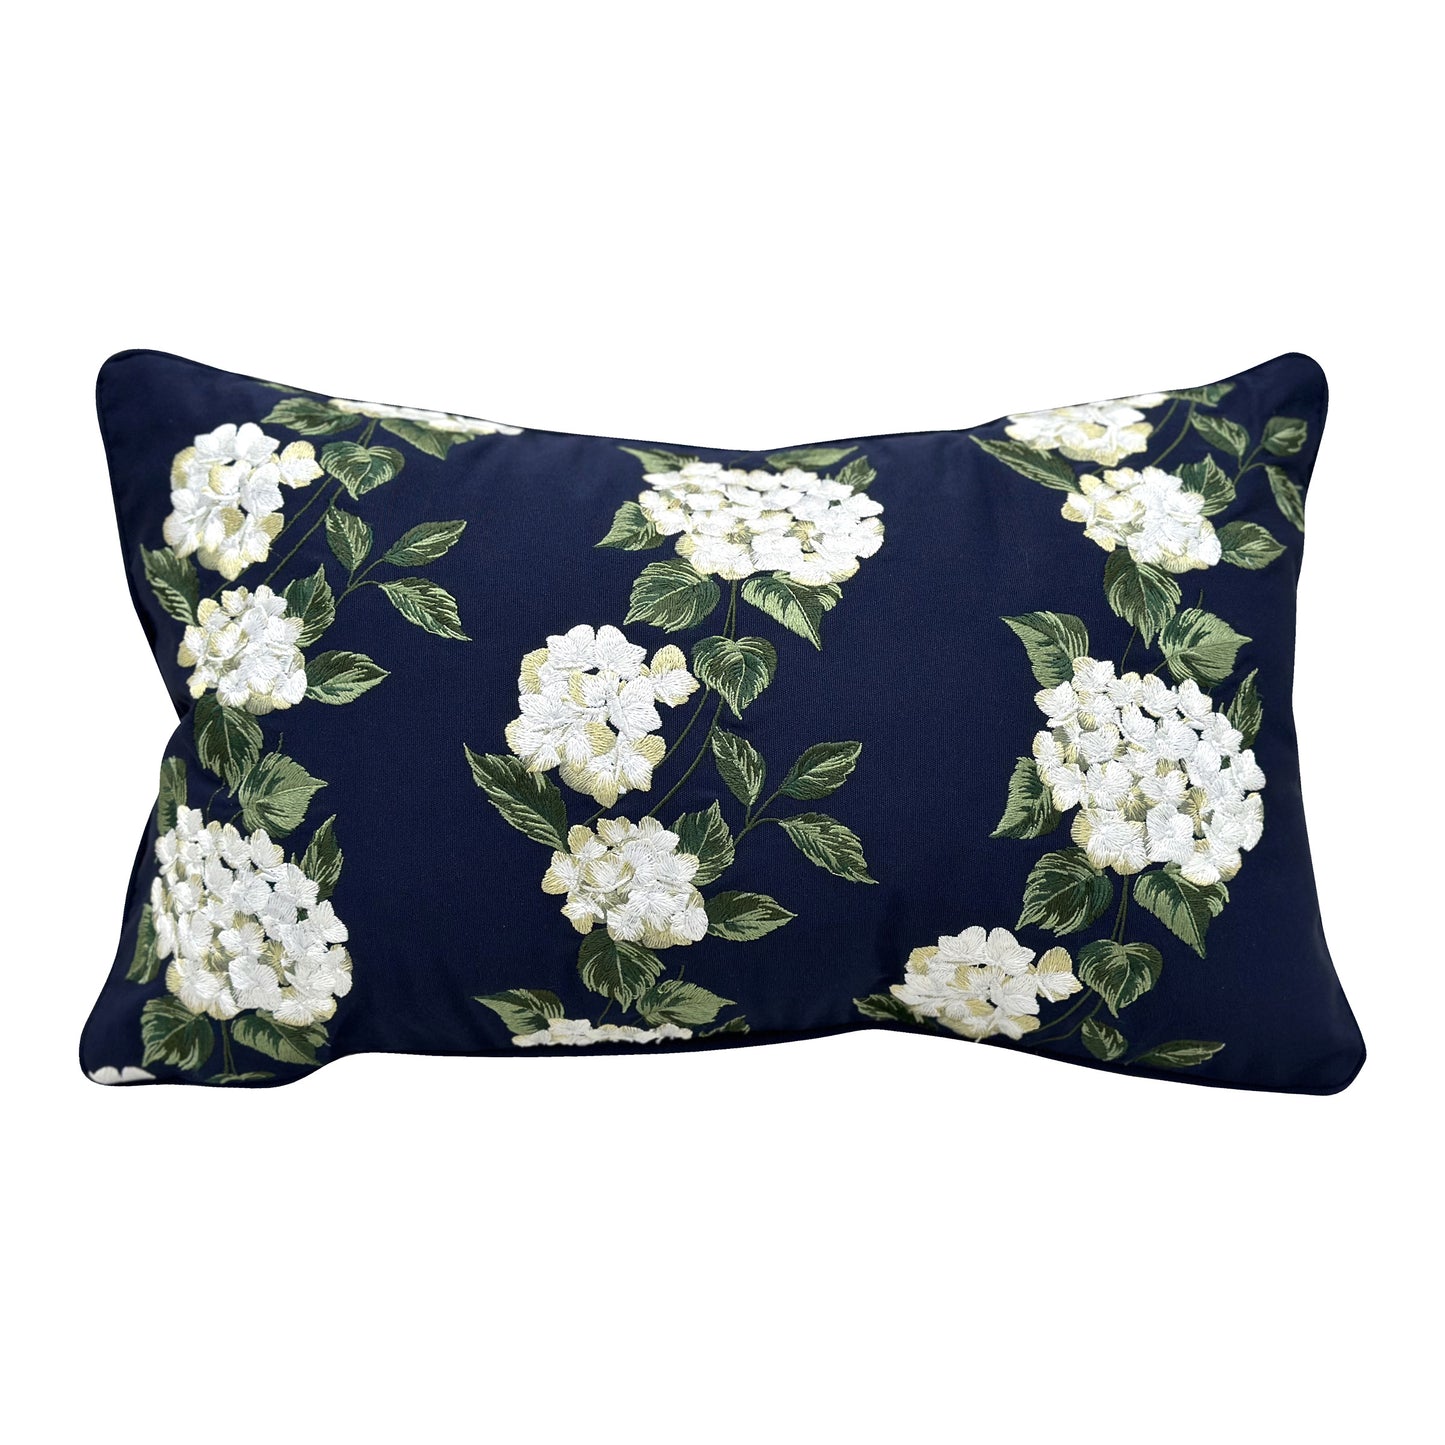 White hydrangea blooms with green leaves embroidered on a navy blue background.